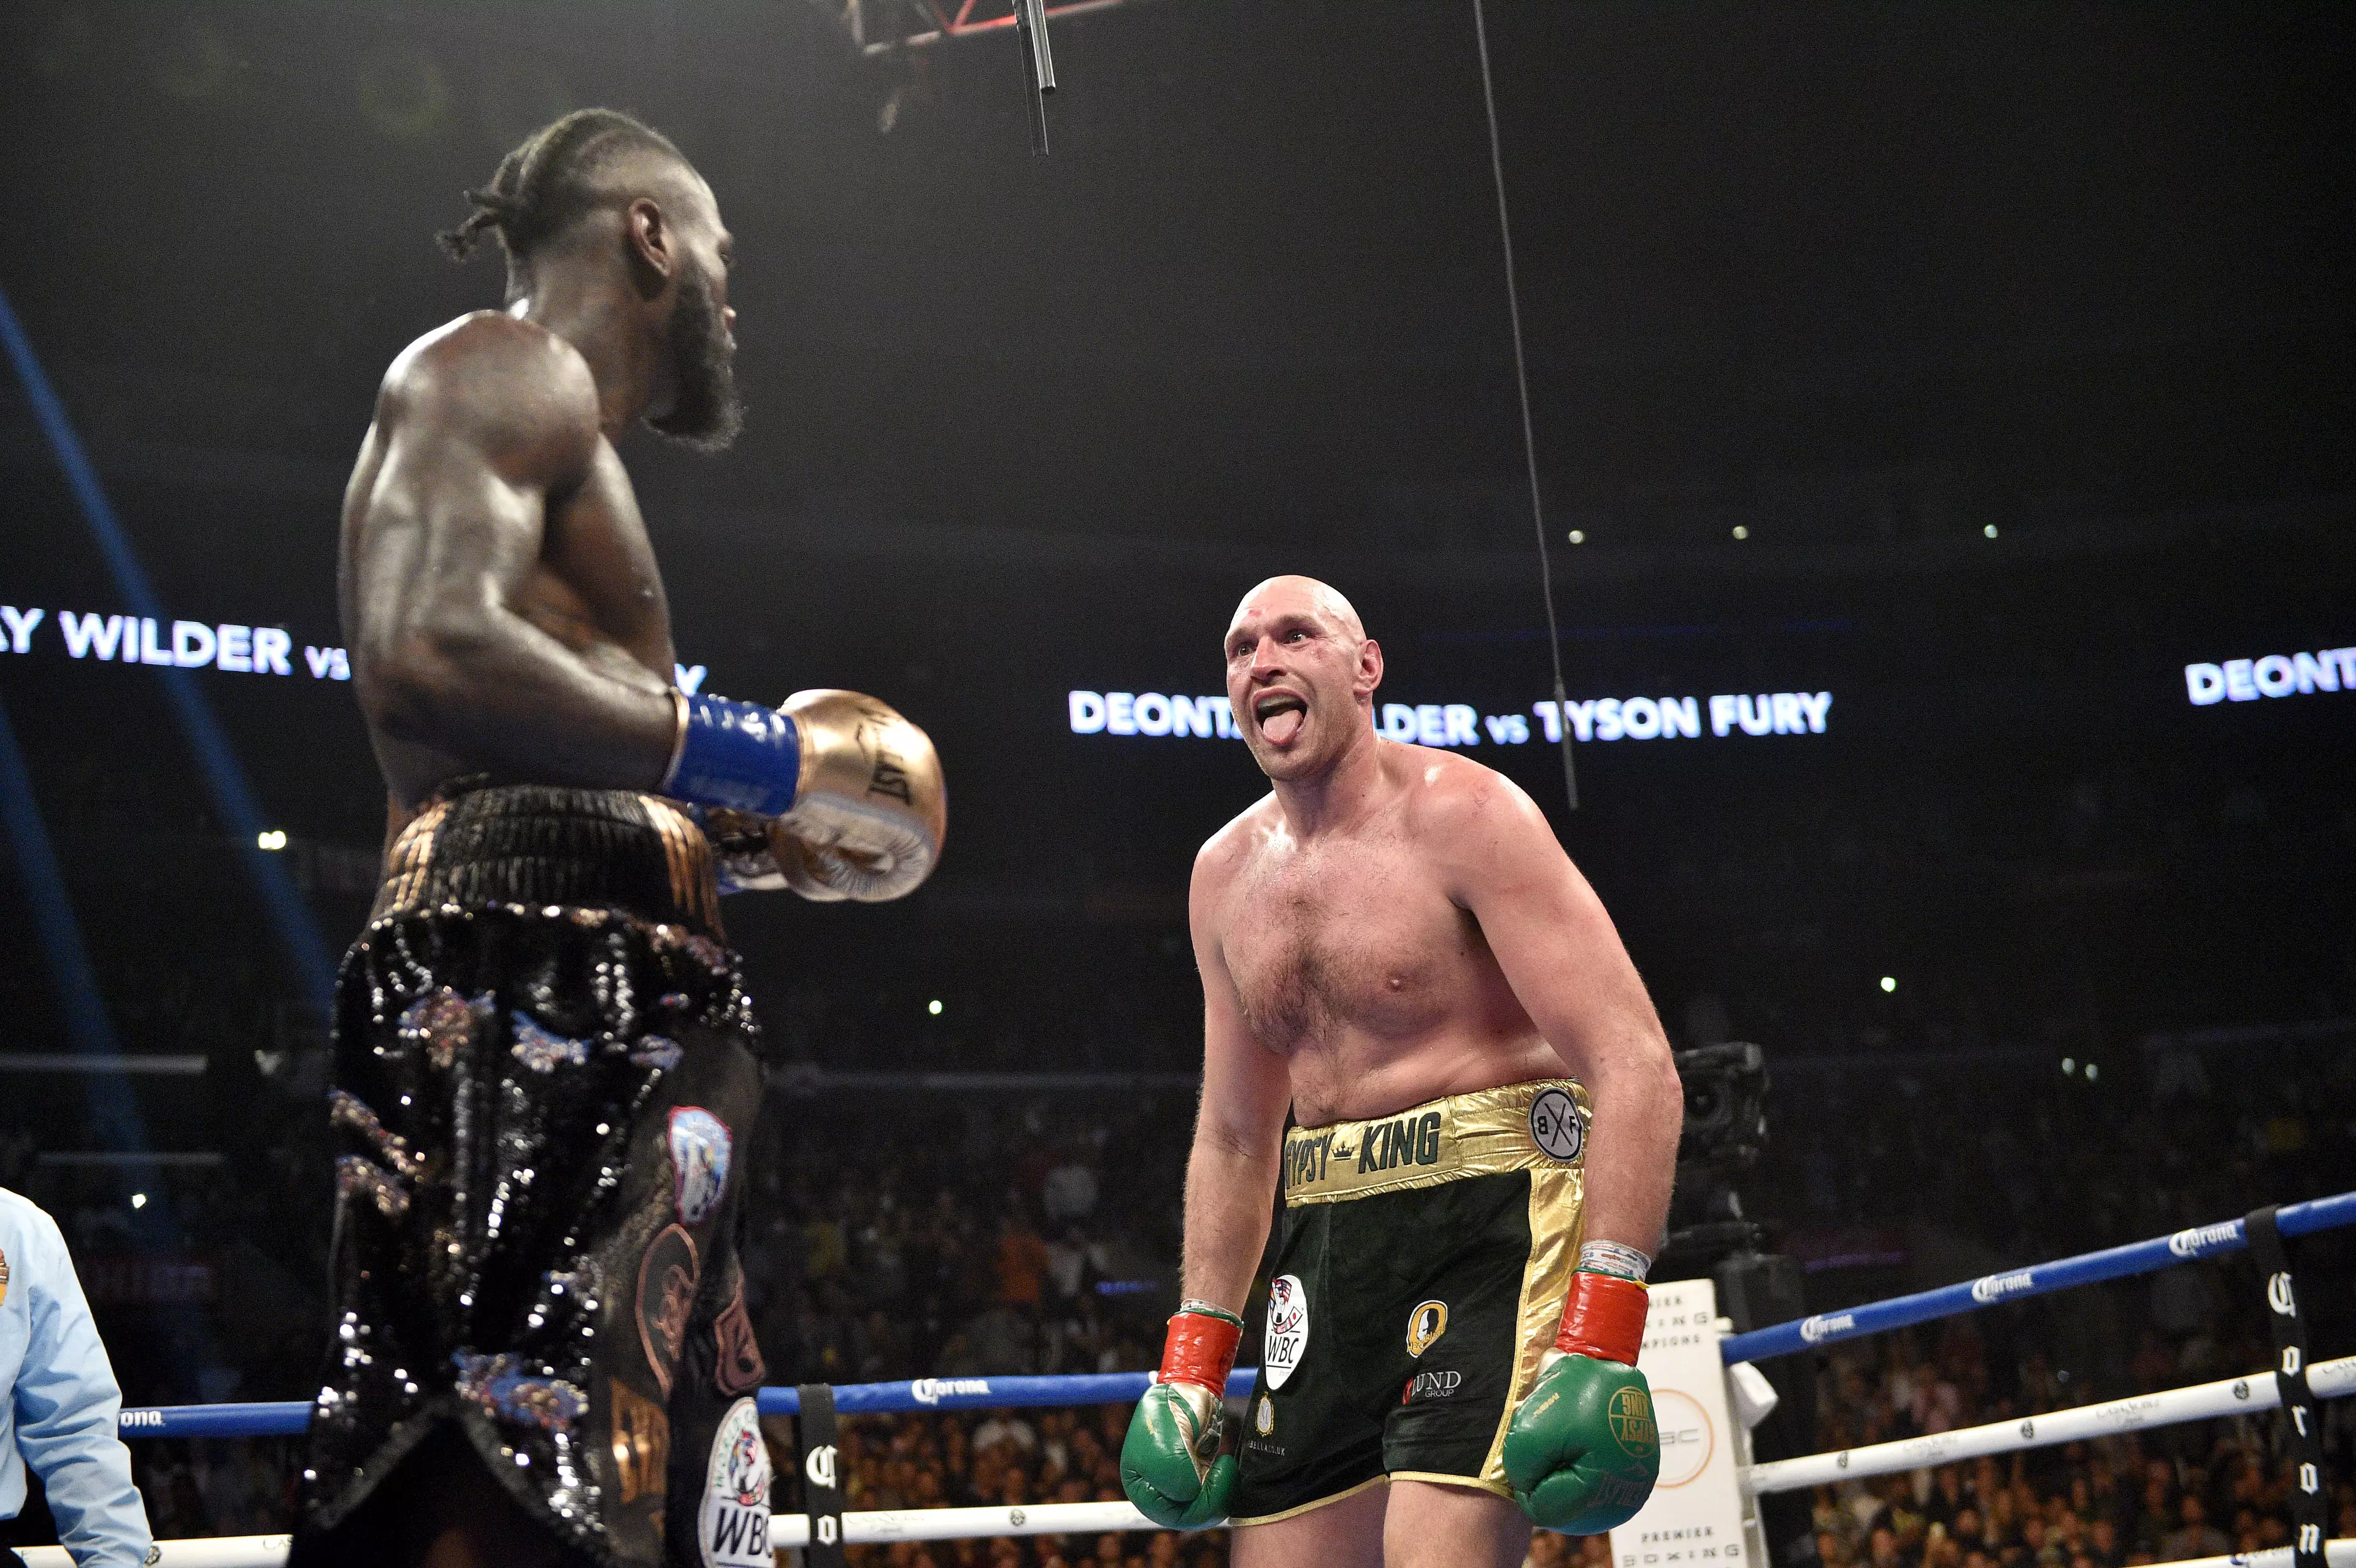 Deontay Wilder and Tyson Fury drew their thrilling contest in Los Angeles last December